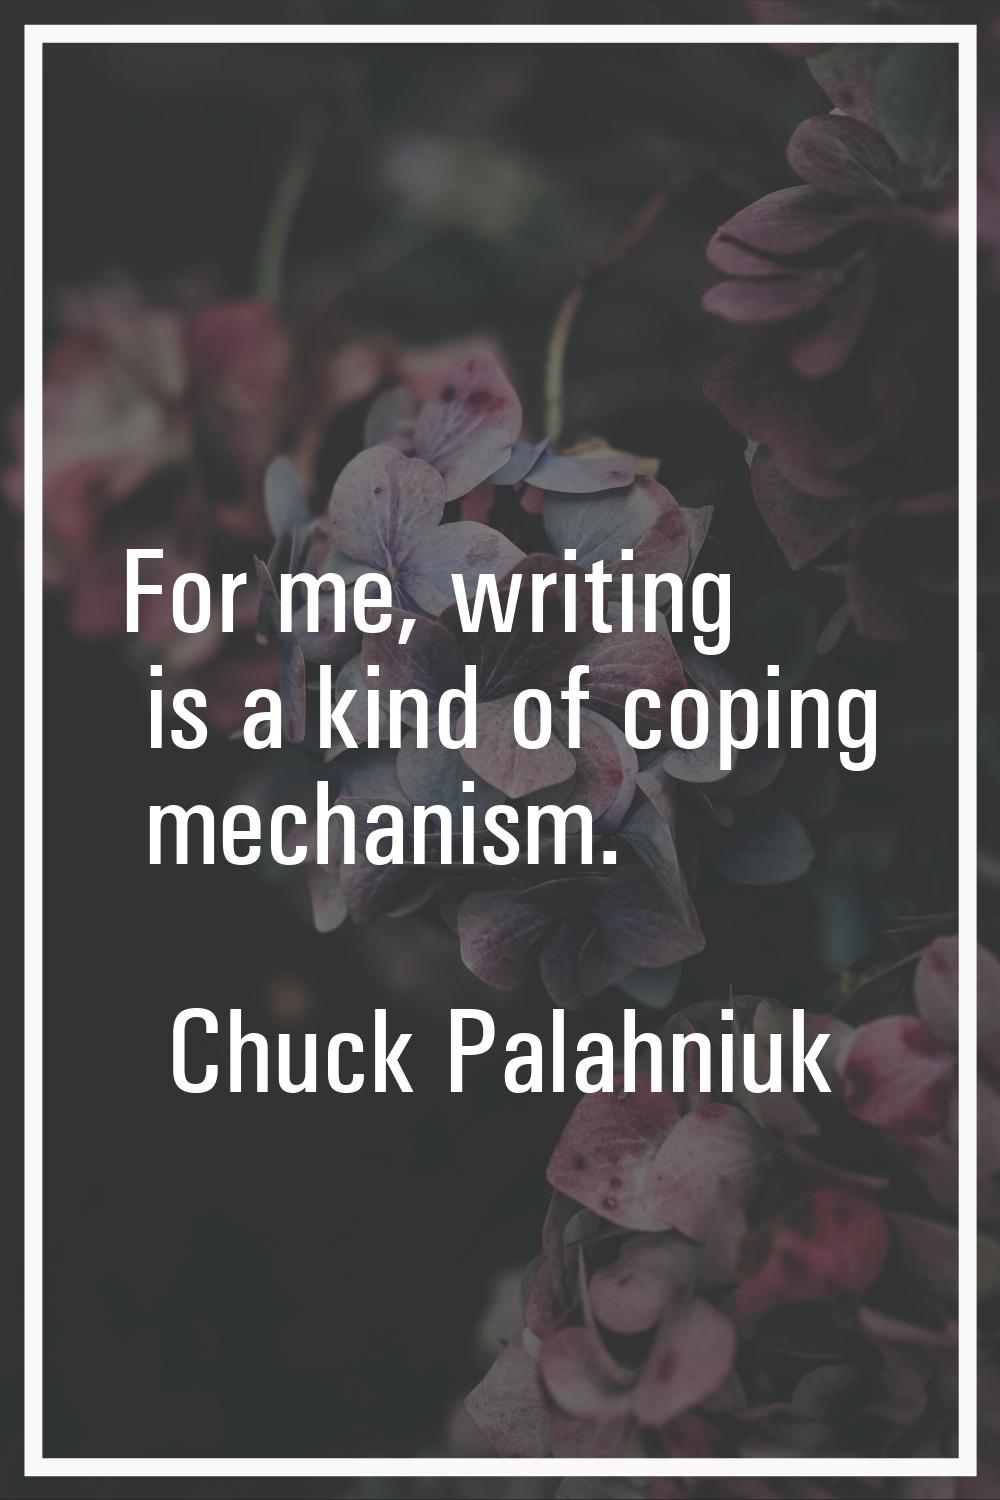 For me, writing is a kind of coping mechanism.